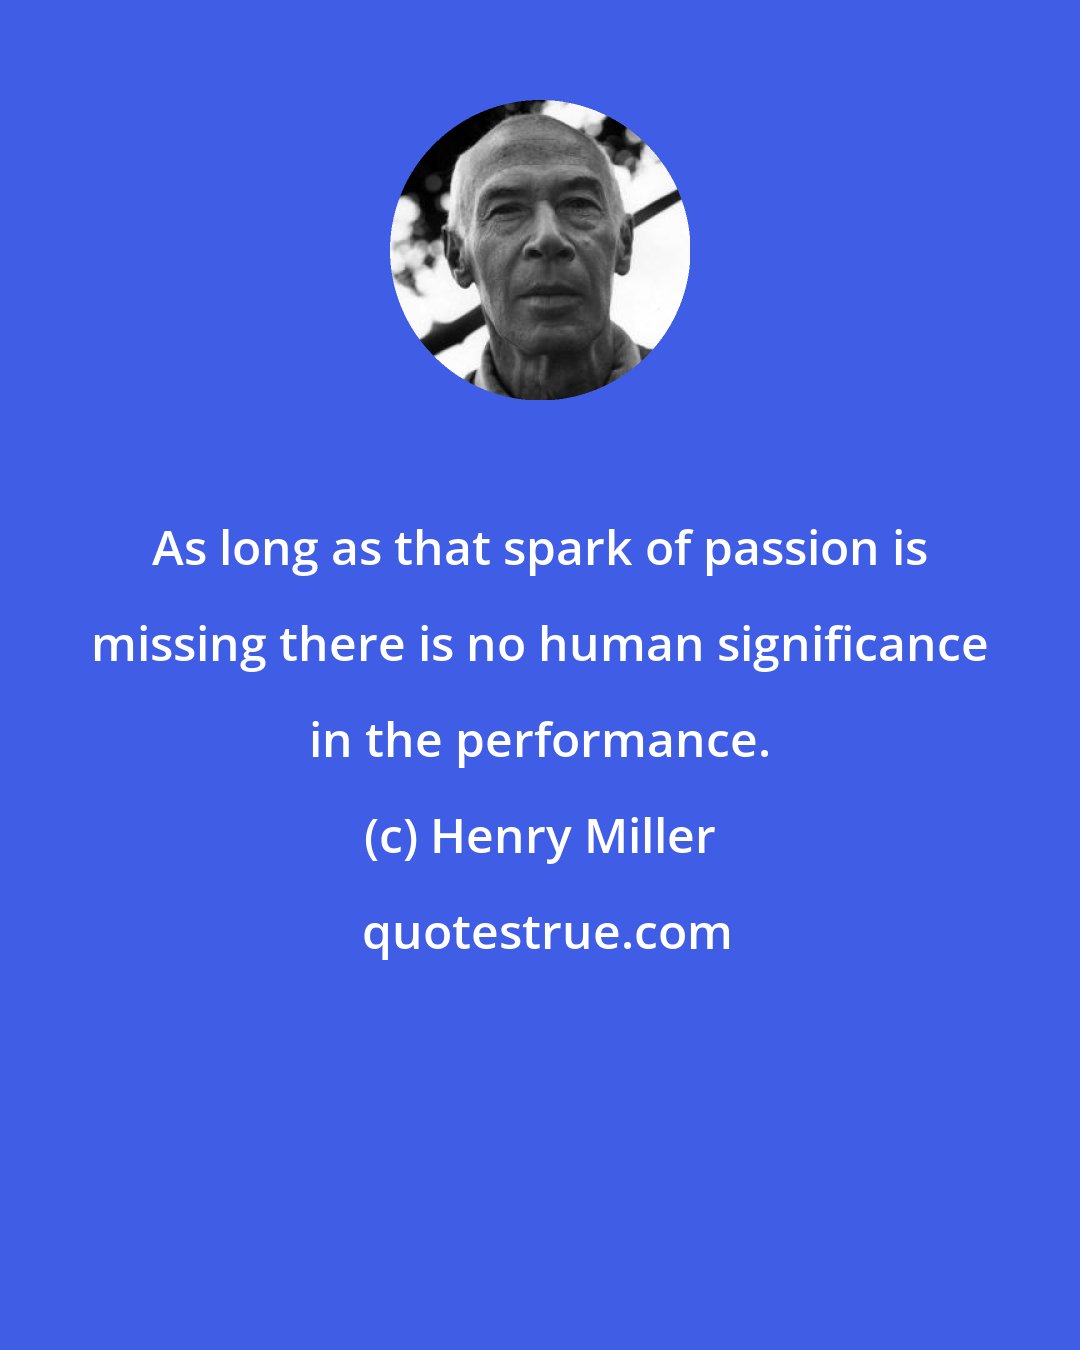 Henry Miller: As long as that spark of passion is missing there is no human significance in the performance.